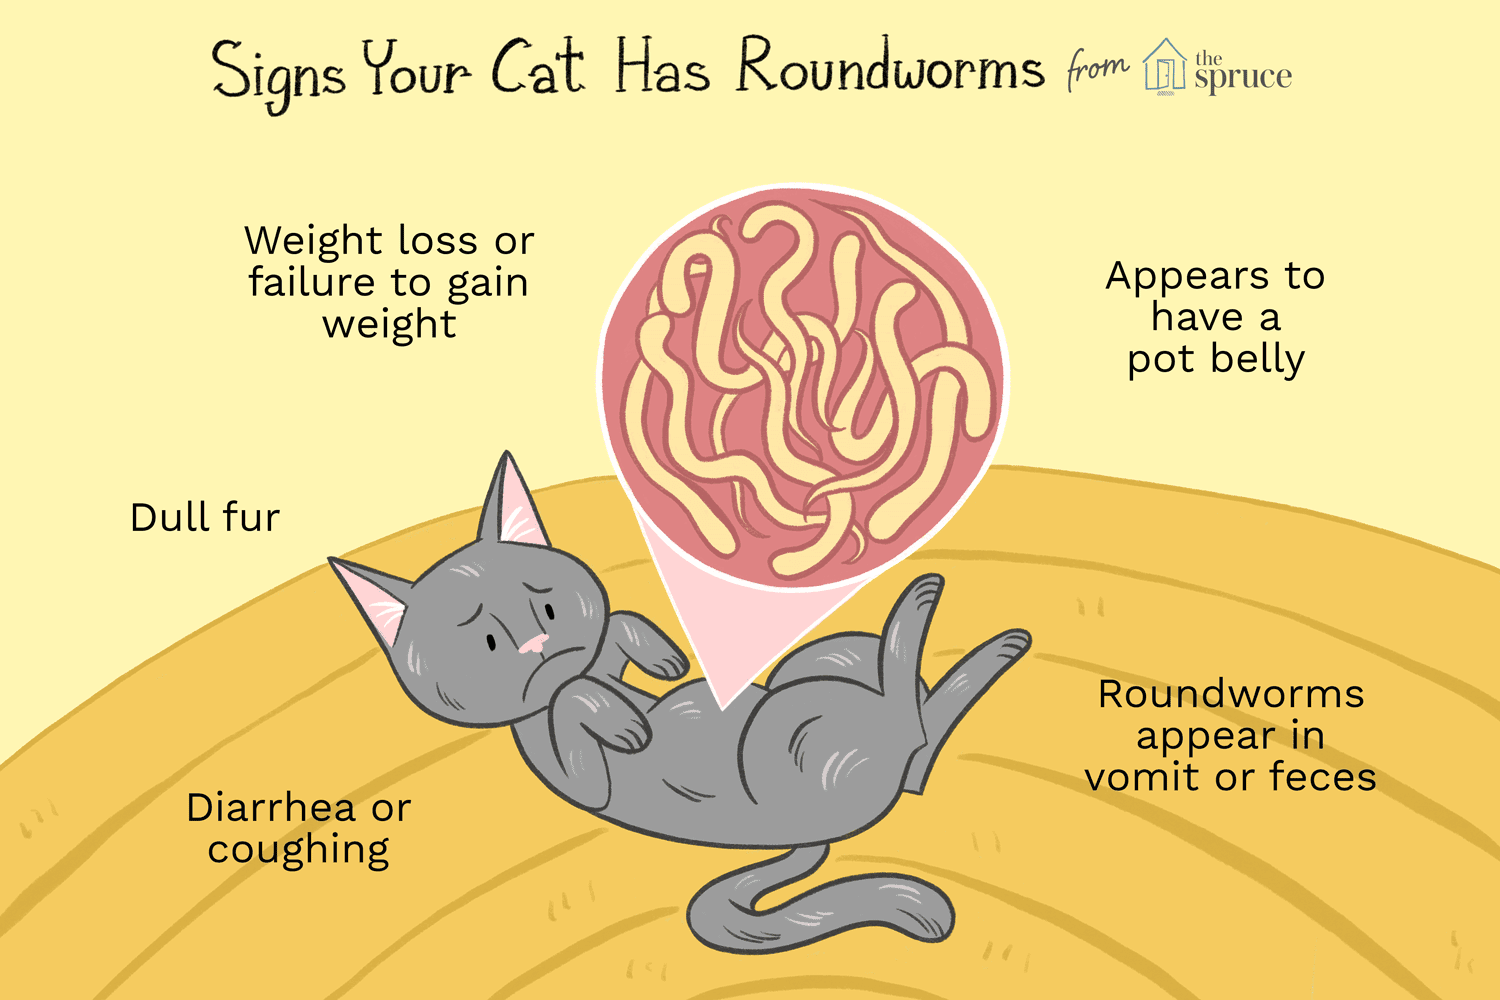 How to Treat Roundworms in Cats